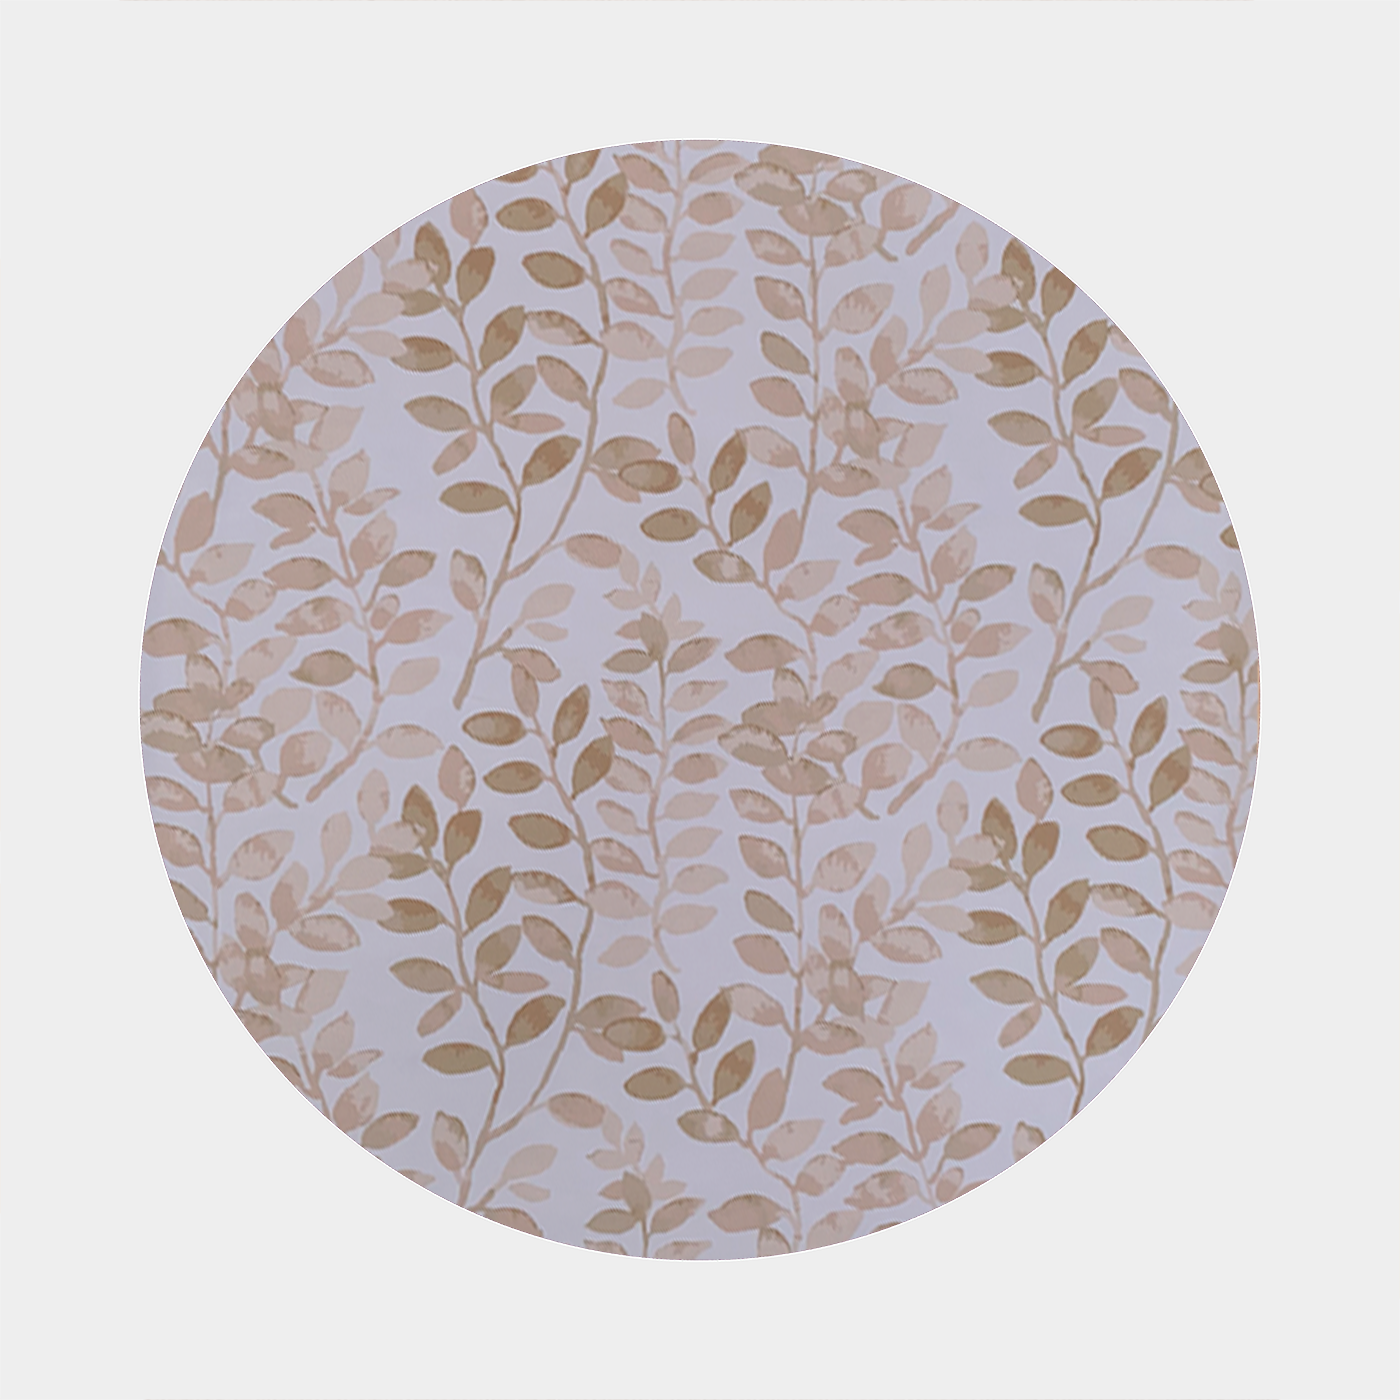 Fabric pattern with rusty leaves on a beige background